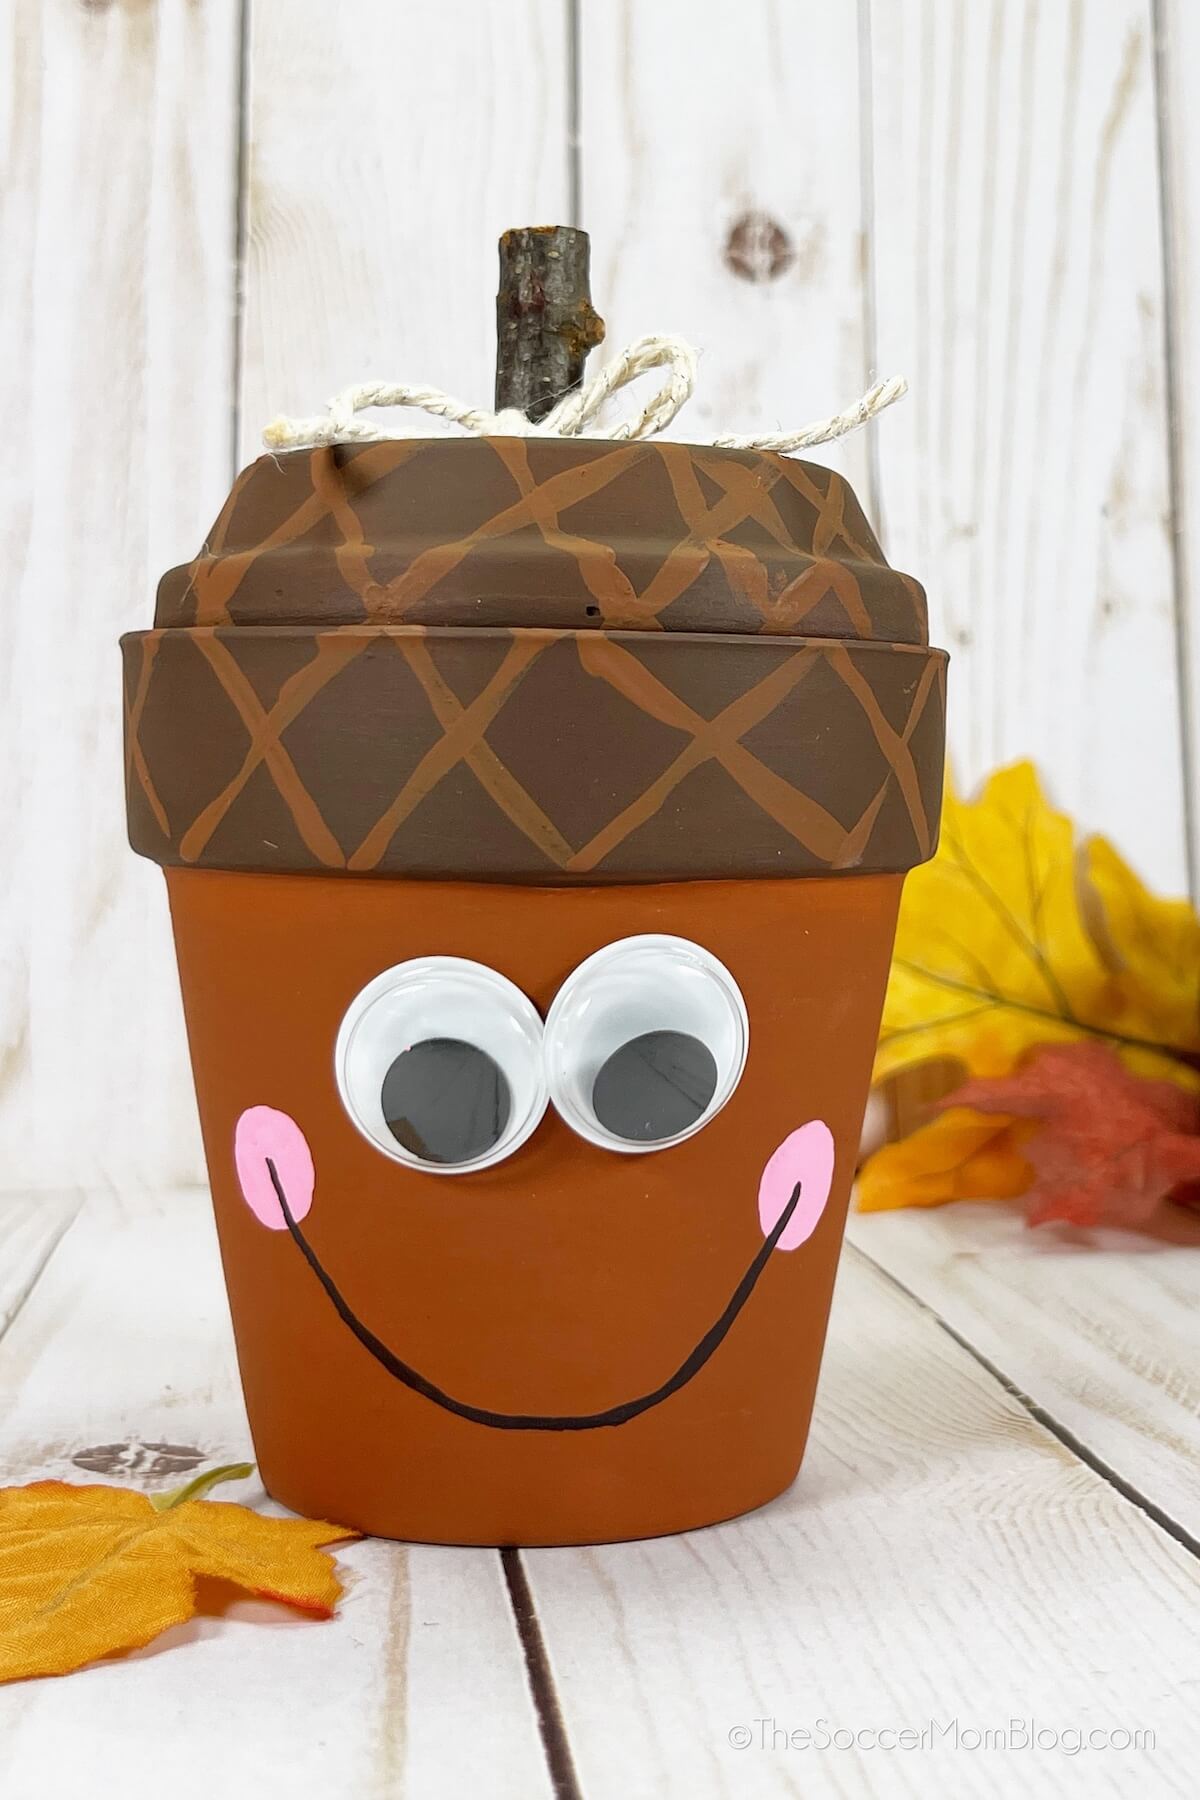 terra cotta pot painted to look like an acorn, with a smiley face